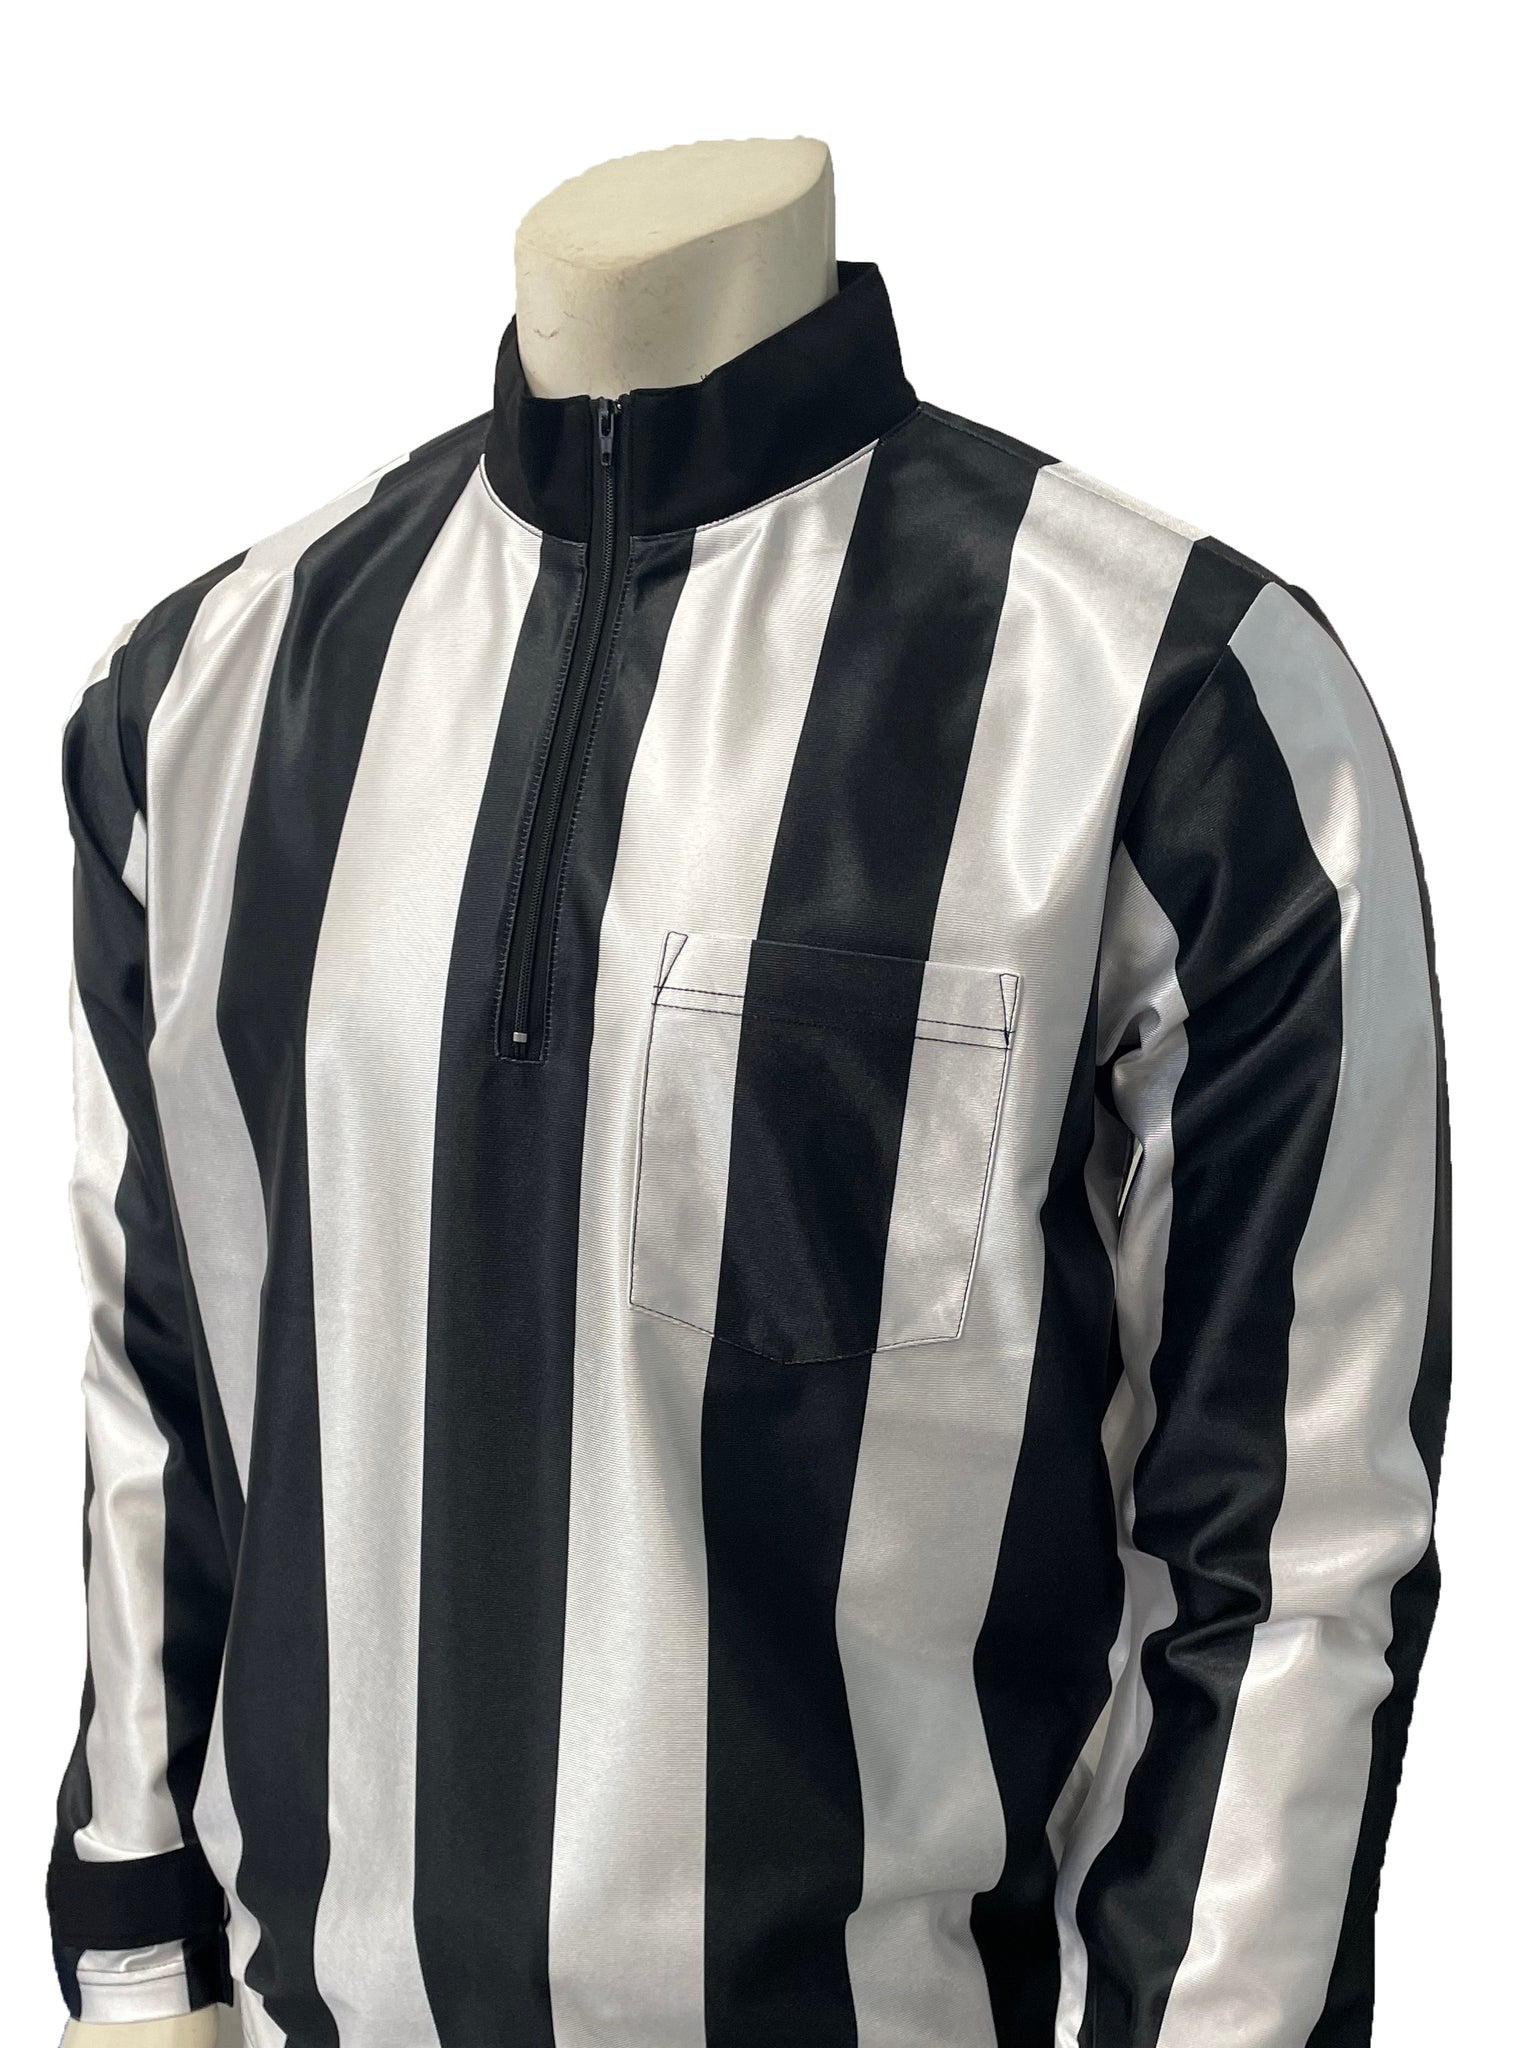 FBS127-Smitty 2 1/4" Stripe Water Resistant Single Layer Shirt